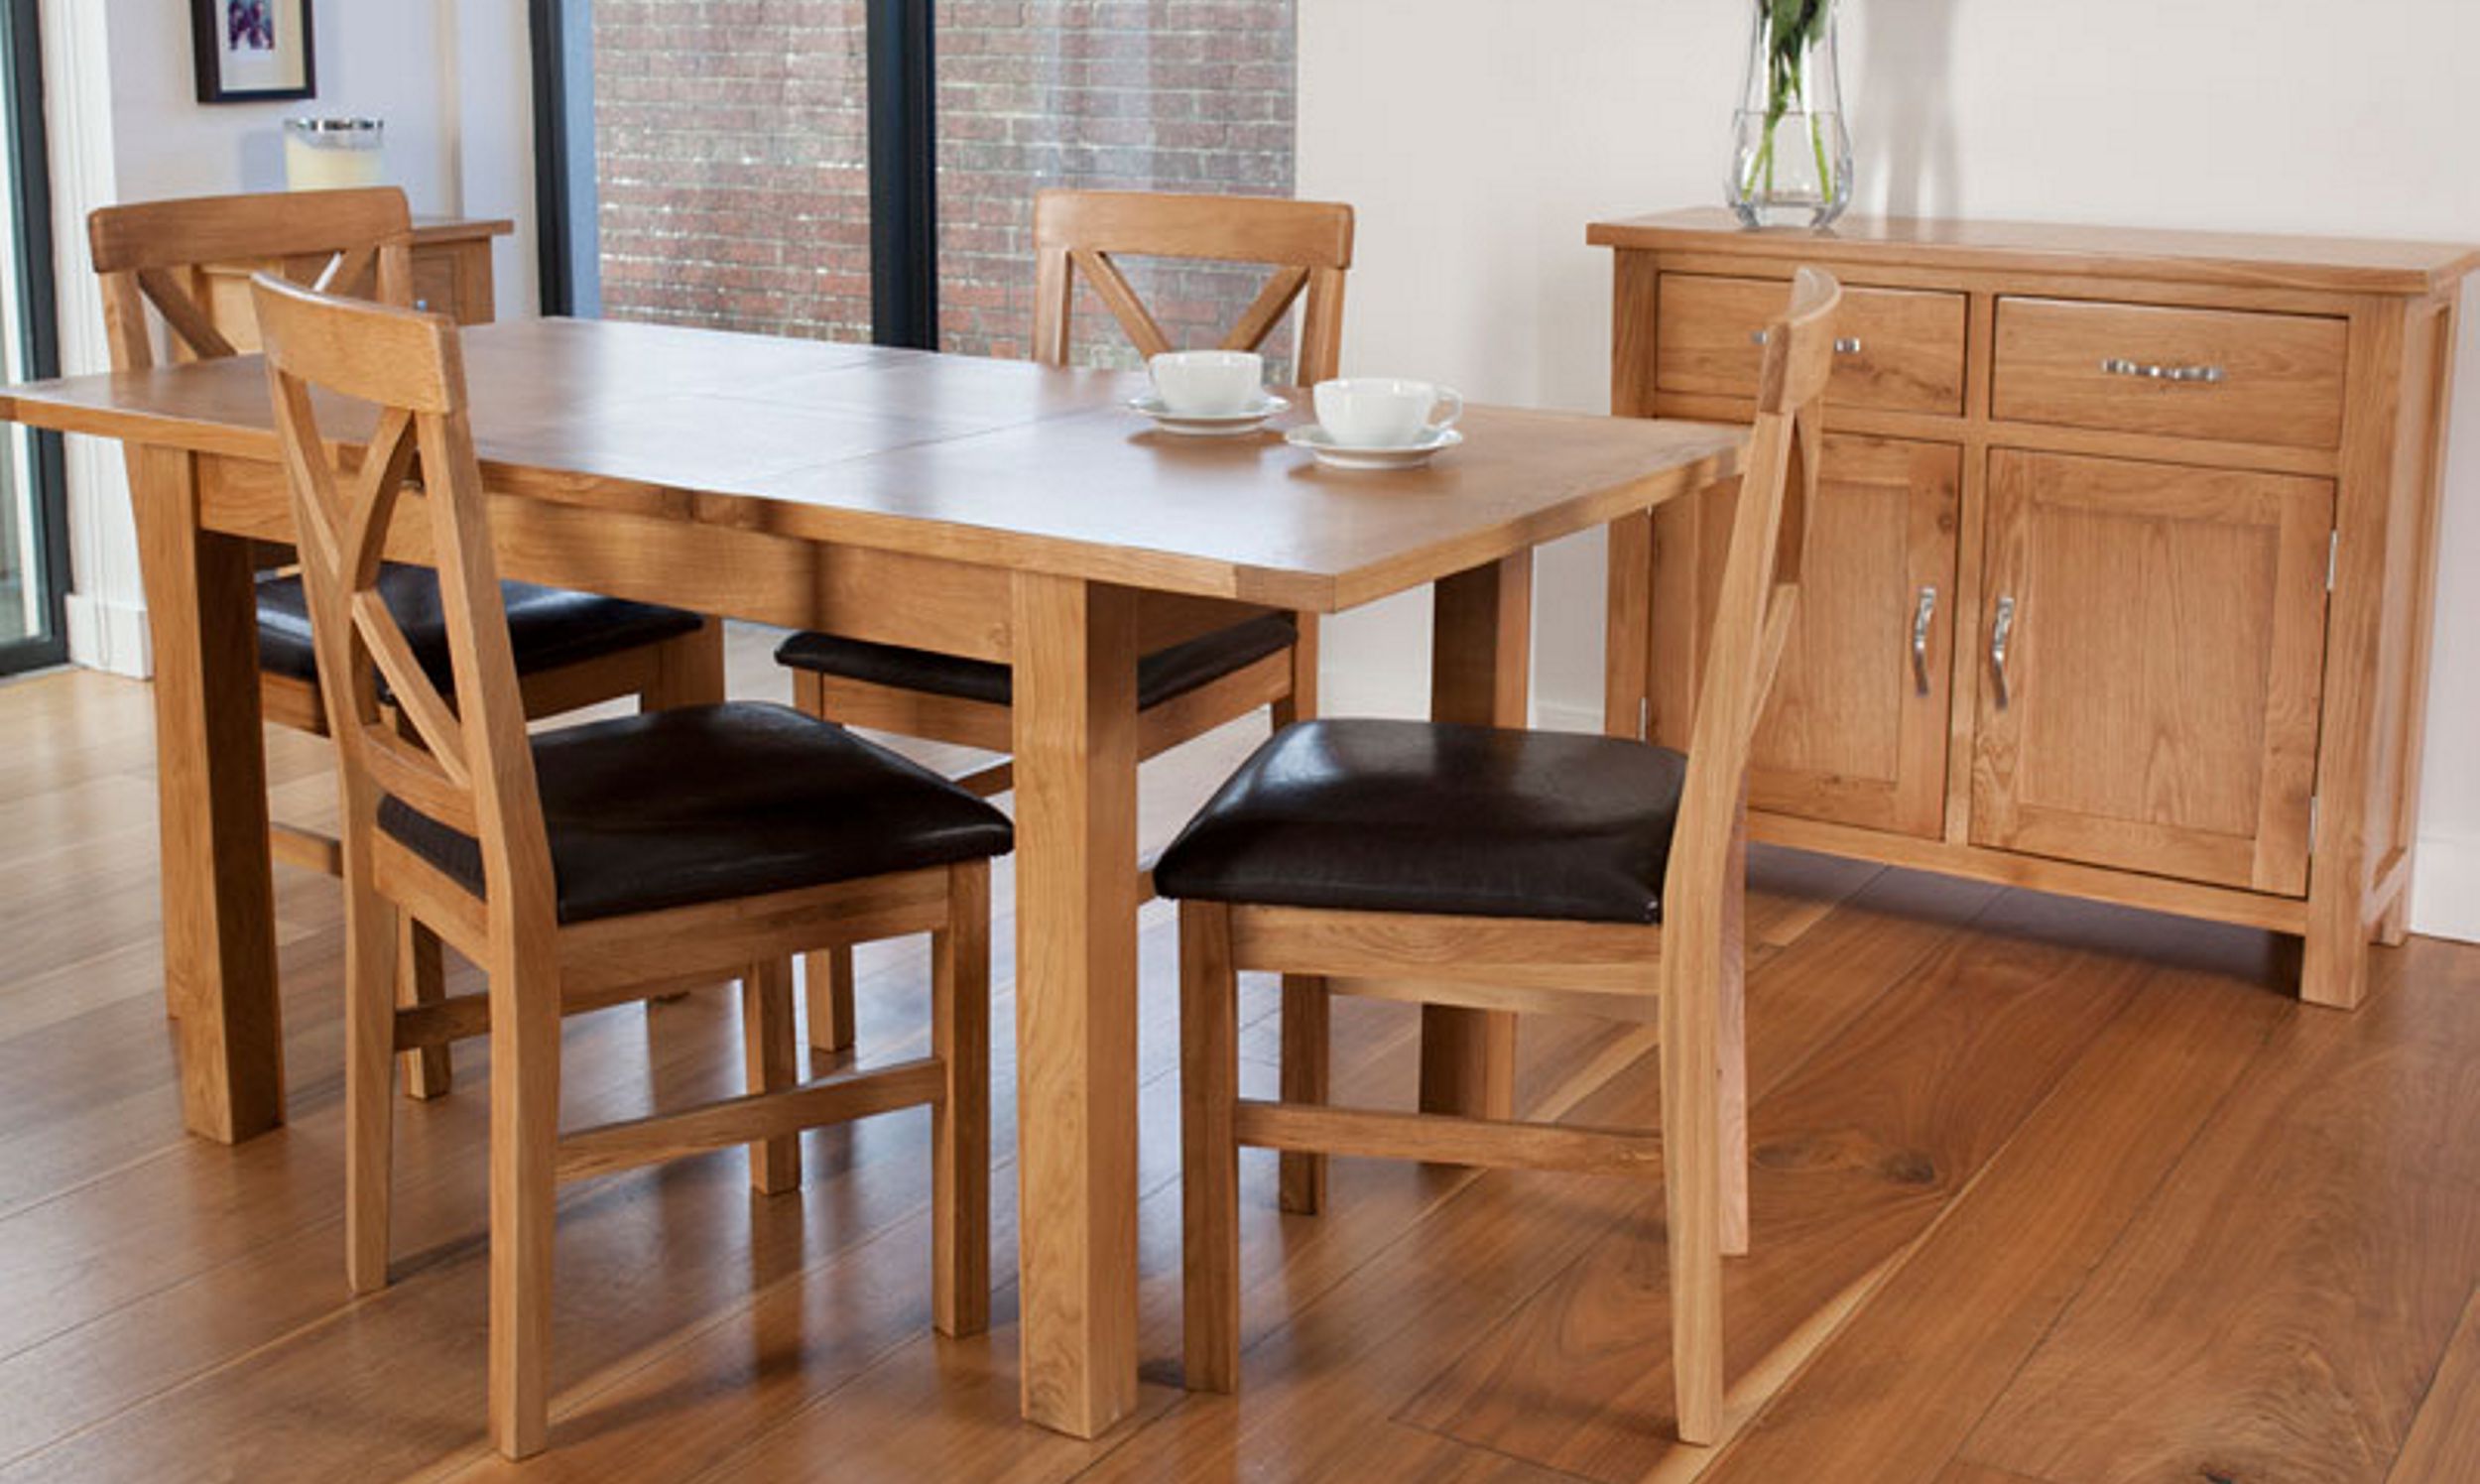 Arun Furnishers Ltd based in Littlehampton, West Sussex supply quality furniture for the home - dining romm and cabinets